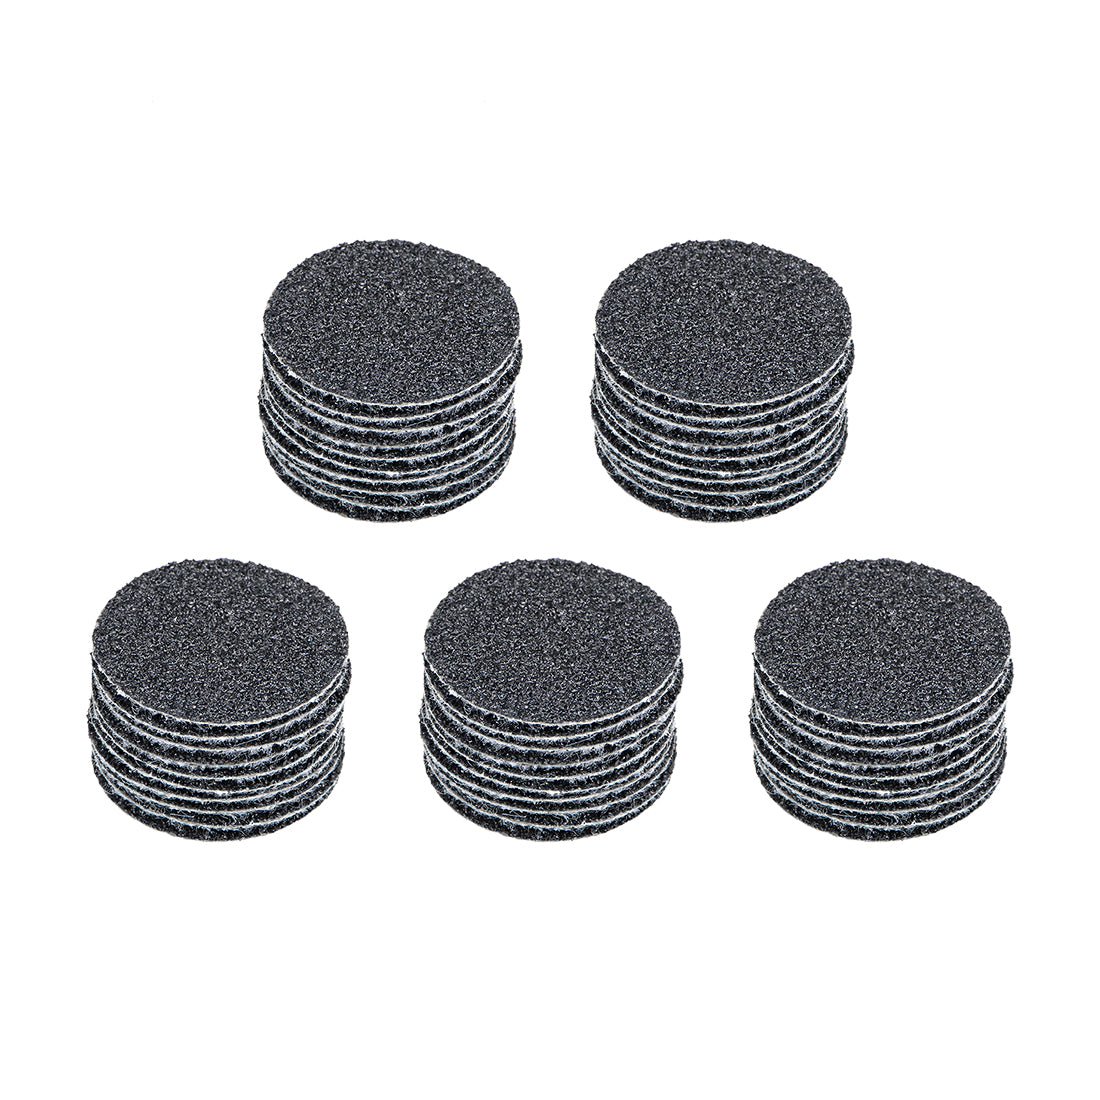 Uxcell Uxcell 1-Inch Hook and Loop Sanding Disc Wet / Dry Silicon Carbide 800 Grit 50 Pcs